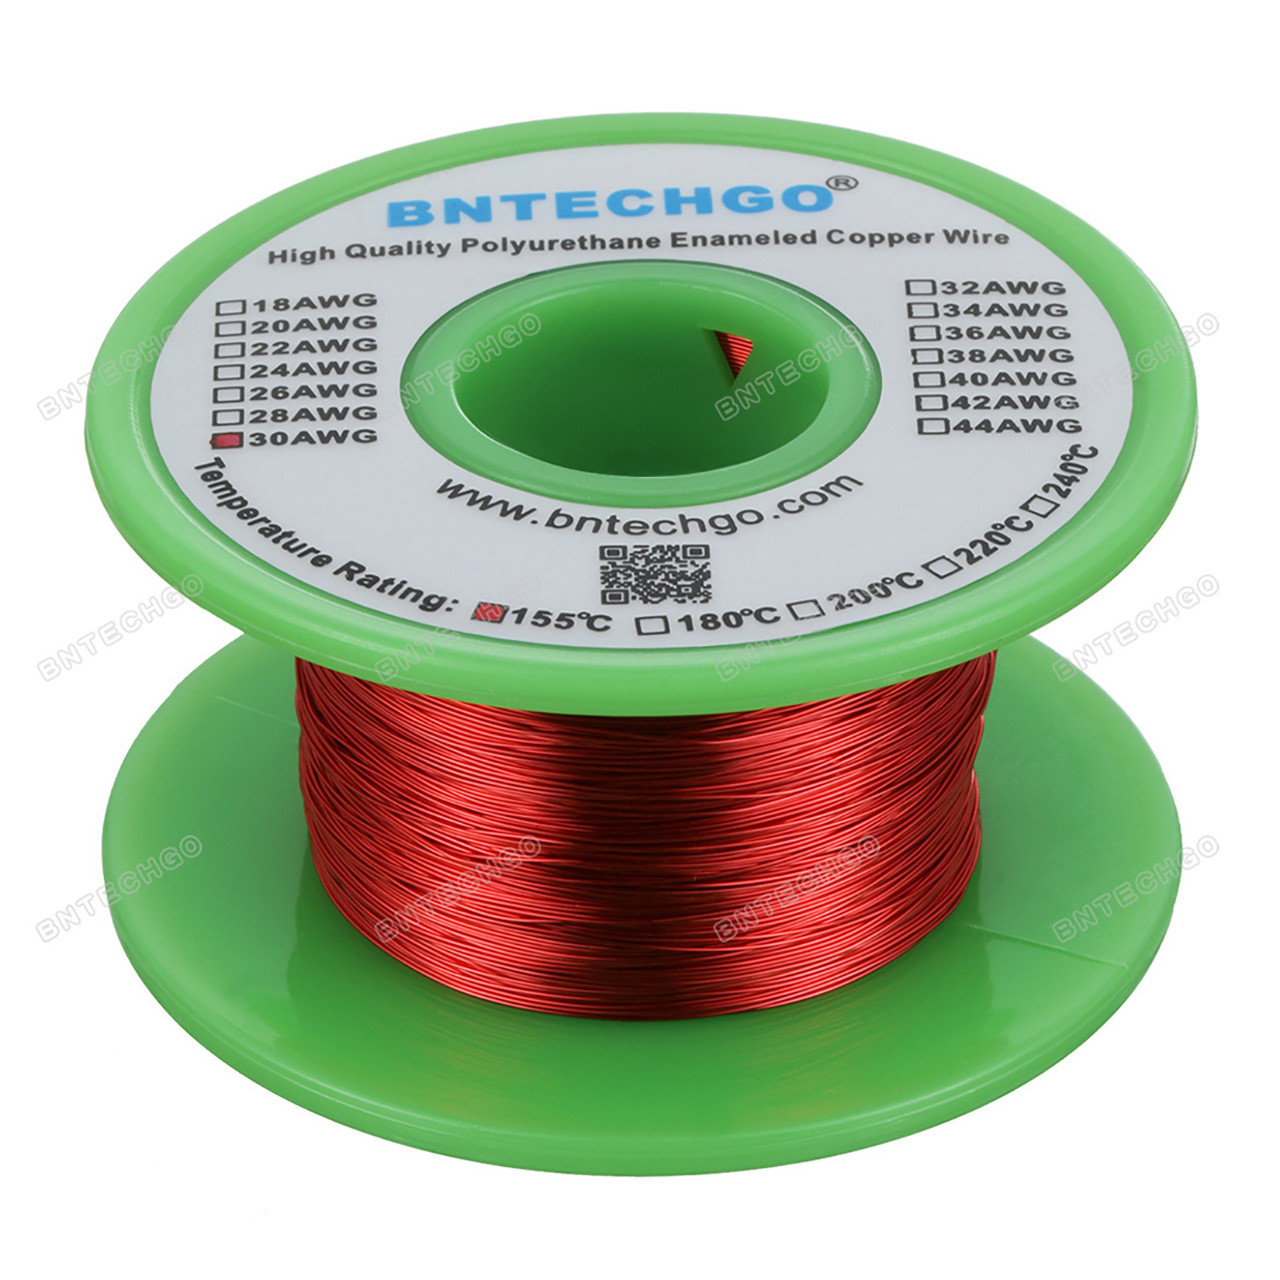 BNTECHGO 28 AWG Magnet Wire - Enameled Copper Wire - Enameled Magnet  Winding Wire - 4 oz - 0.0122 Diameter 1 Spool Coil Red Temperature Rating  155